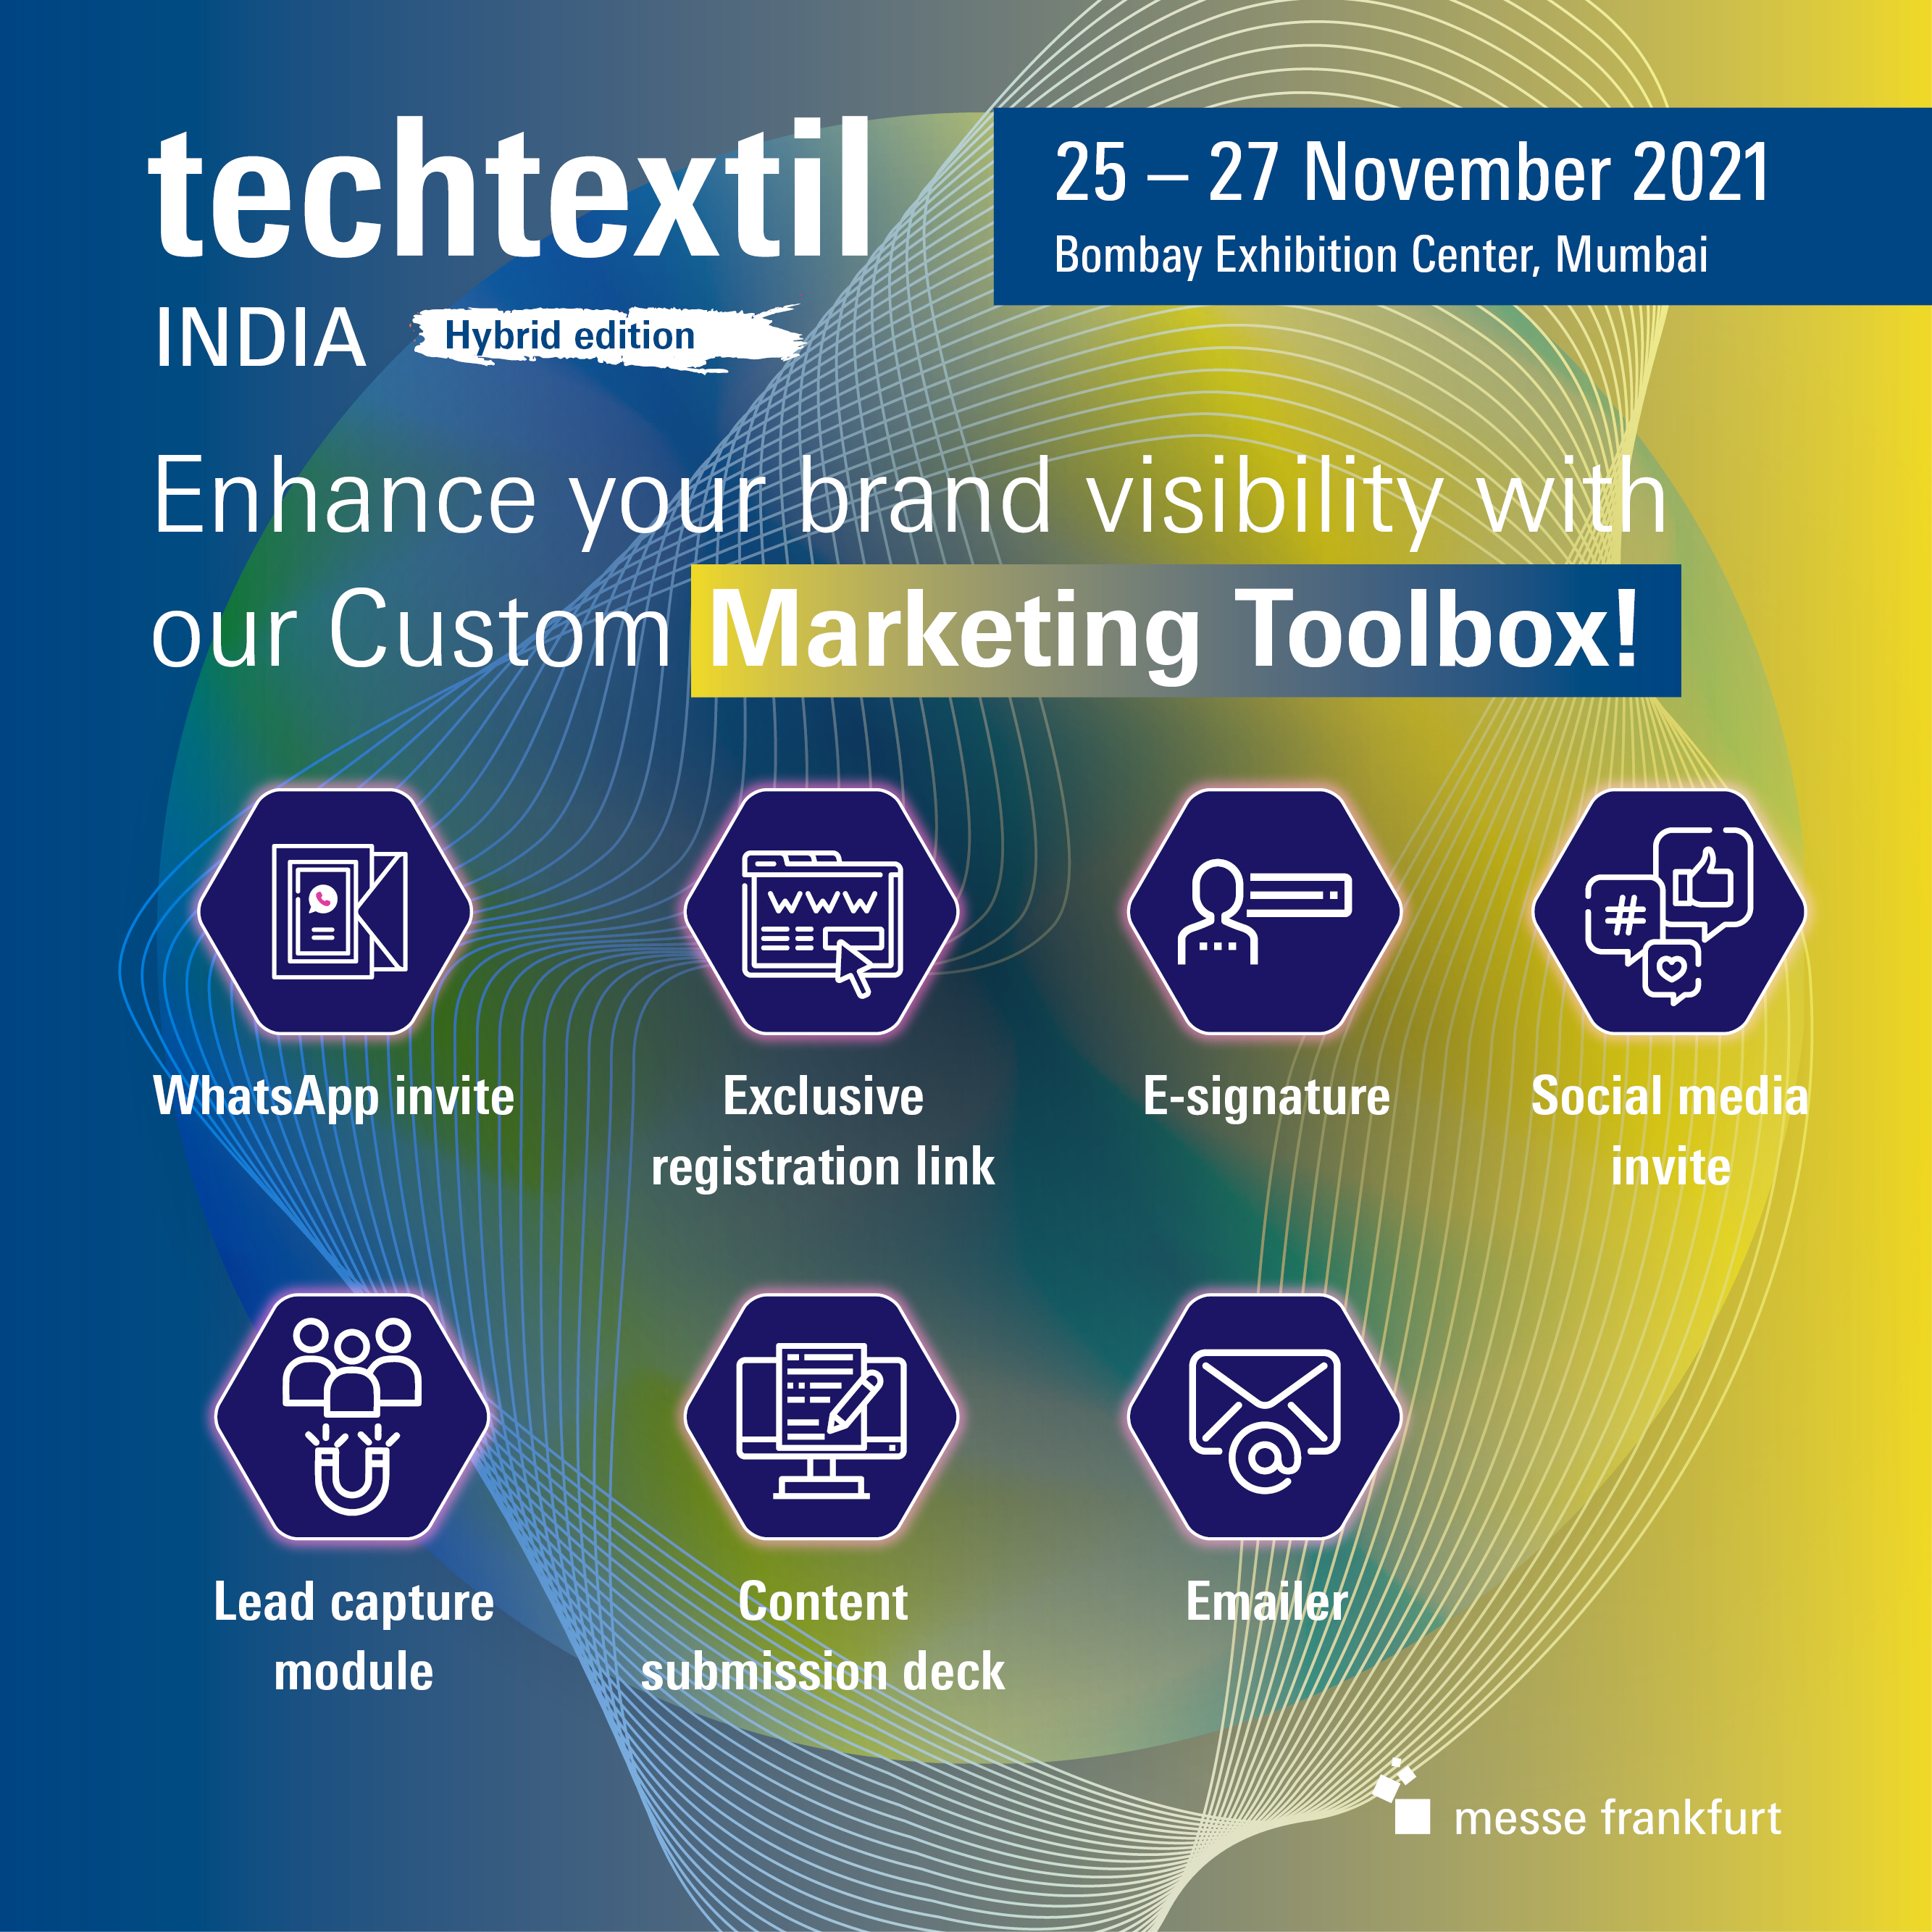 Follow these steps to use the exhibitor marketing toolbox